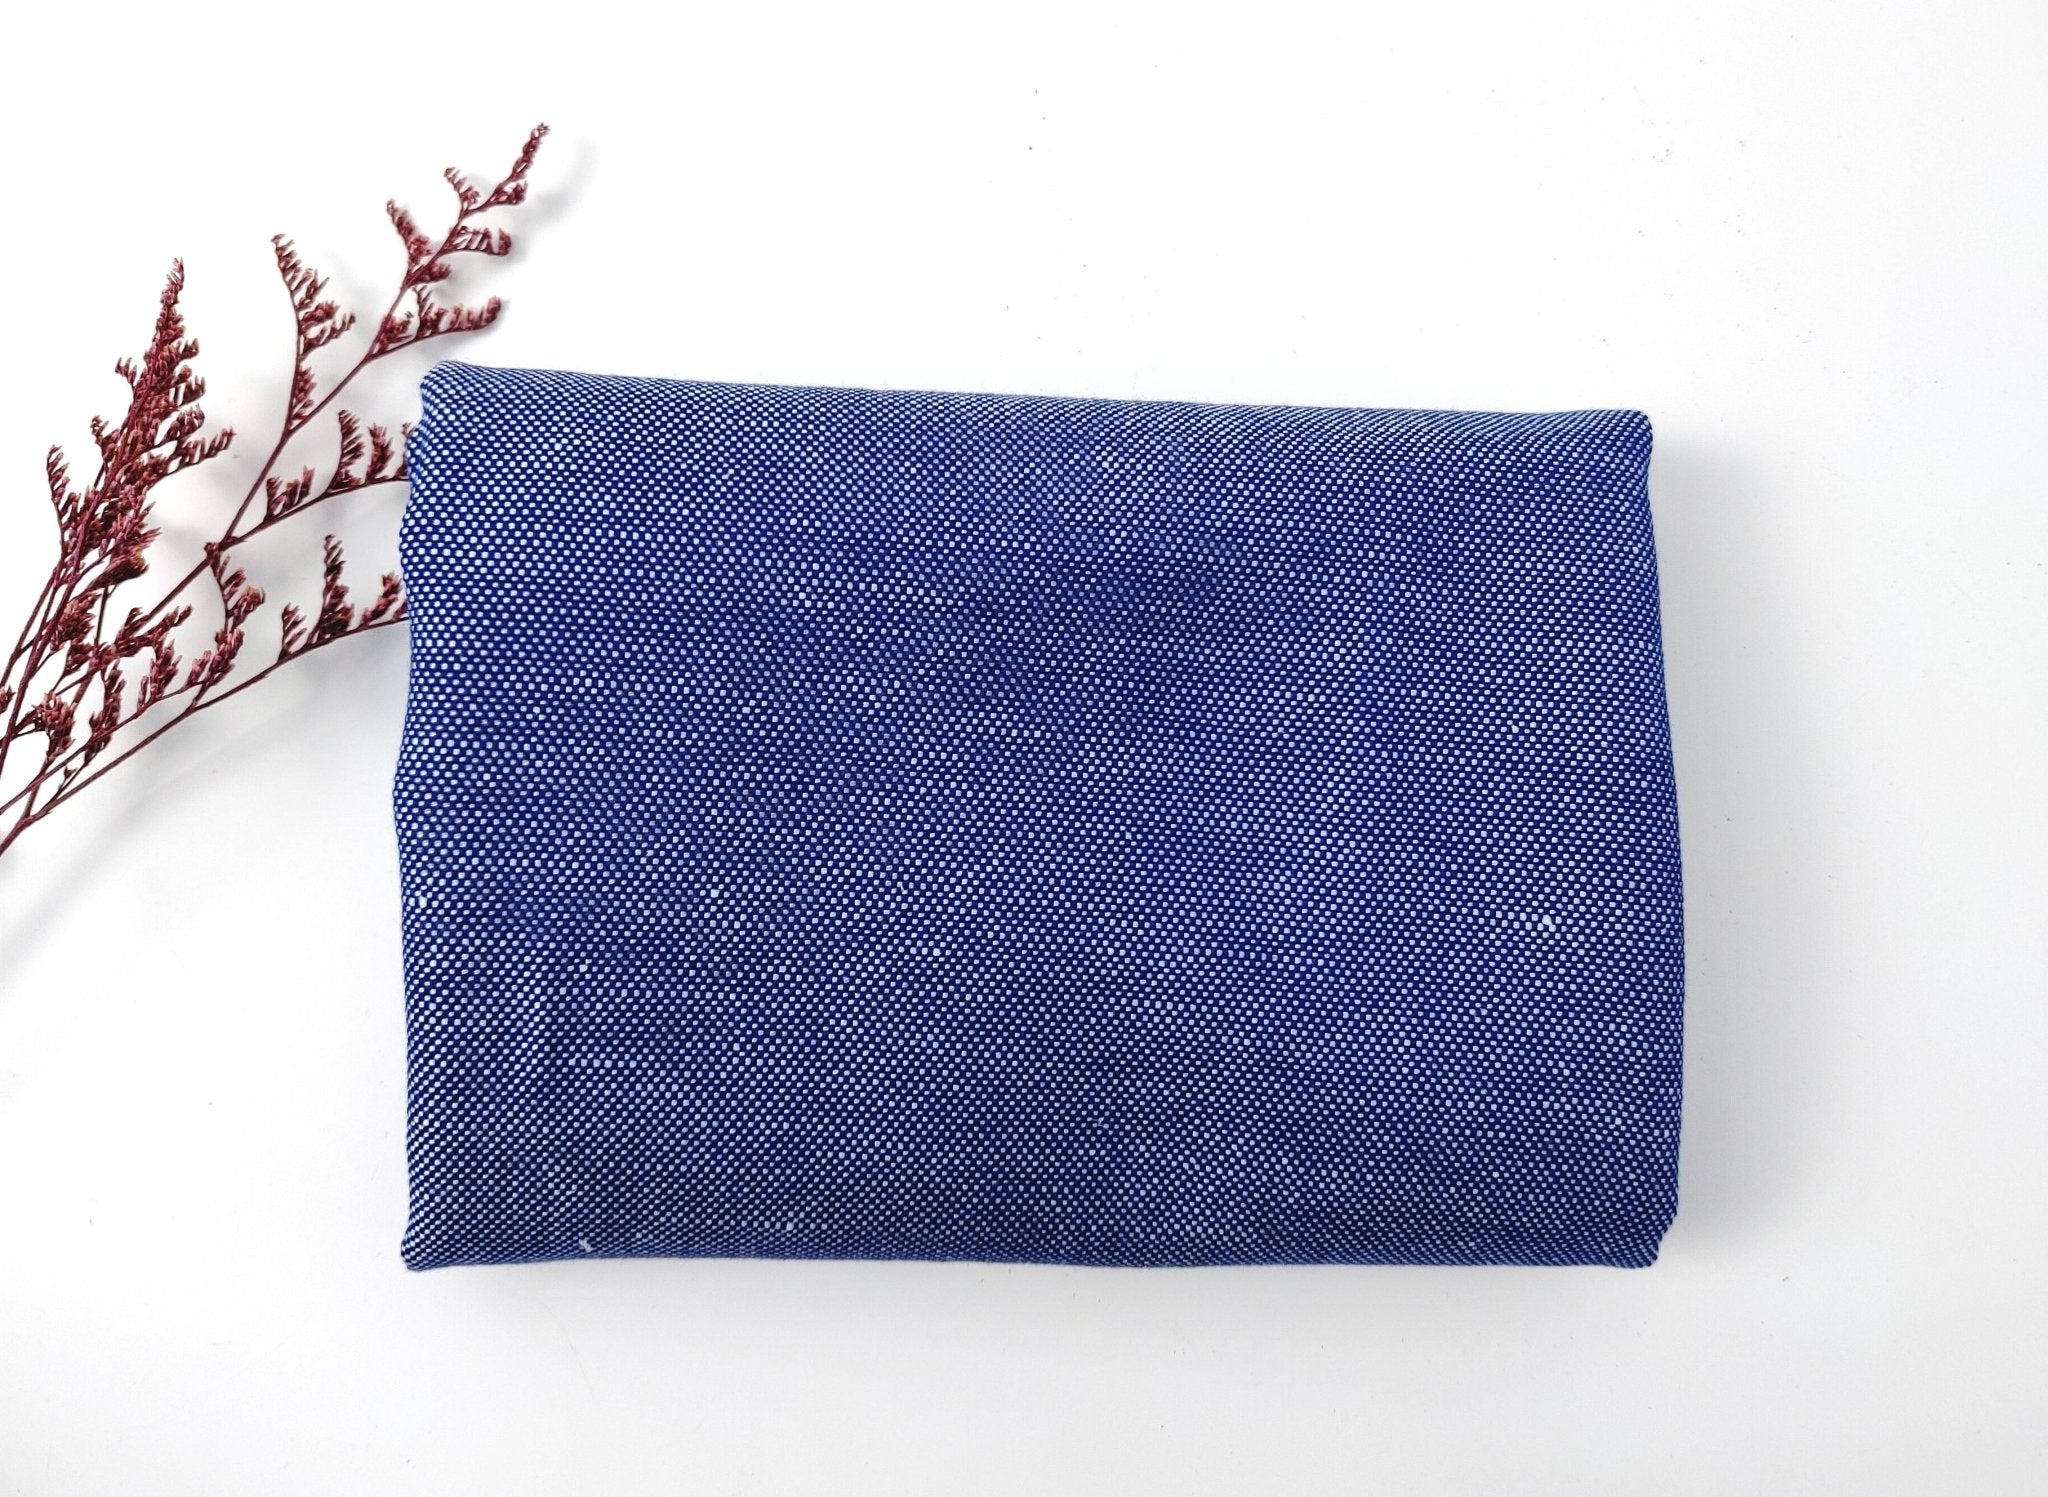 Linen Cotton Navy Chambray Canvas Fabric 3429 - The Linen Lab - Navy